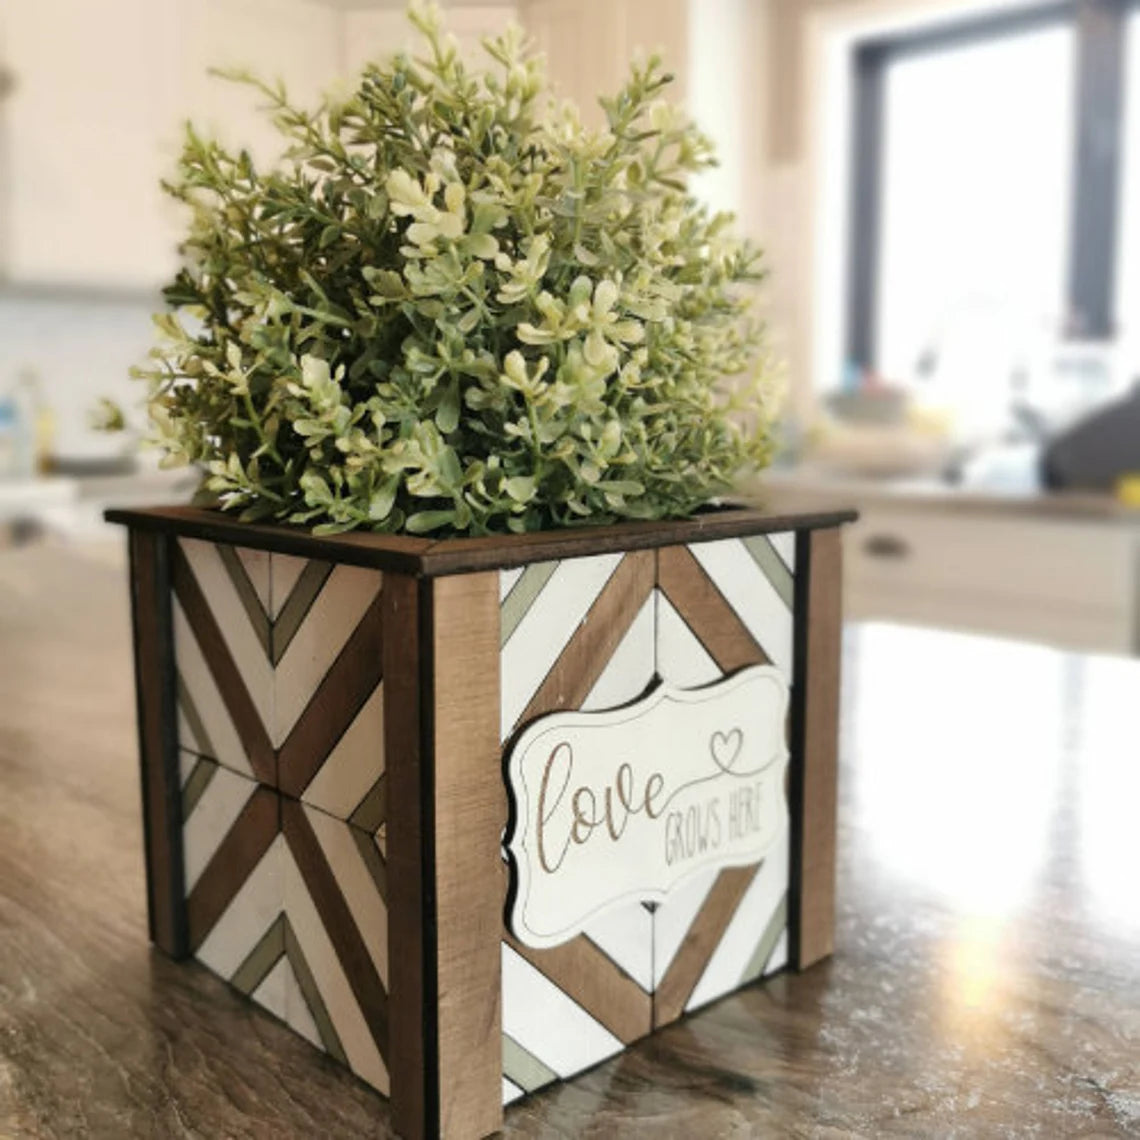 wood projects that sell - wooden planters